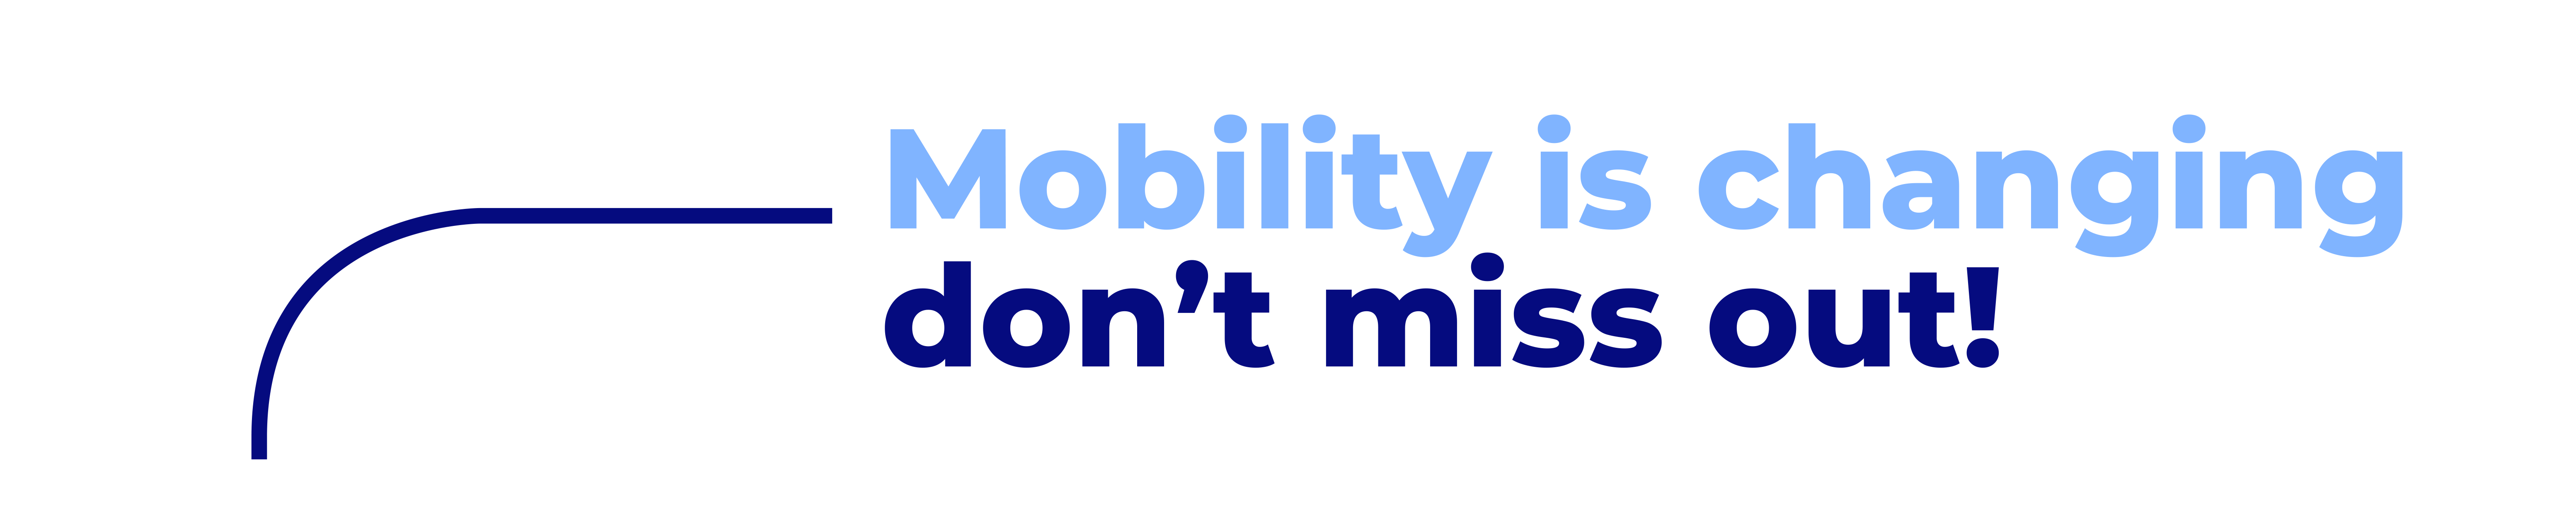 Mobility_is_changing